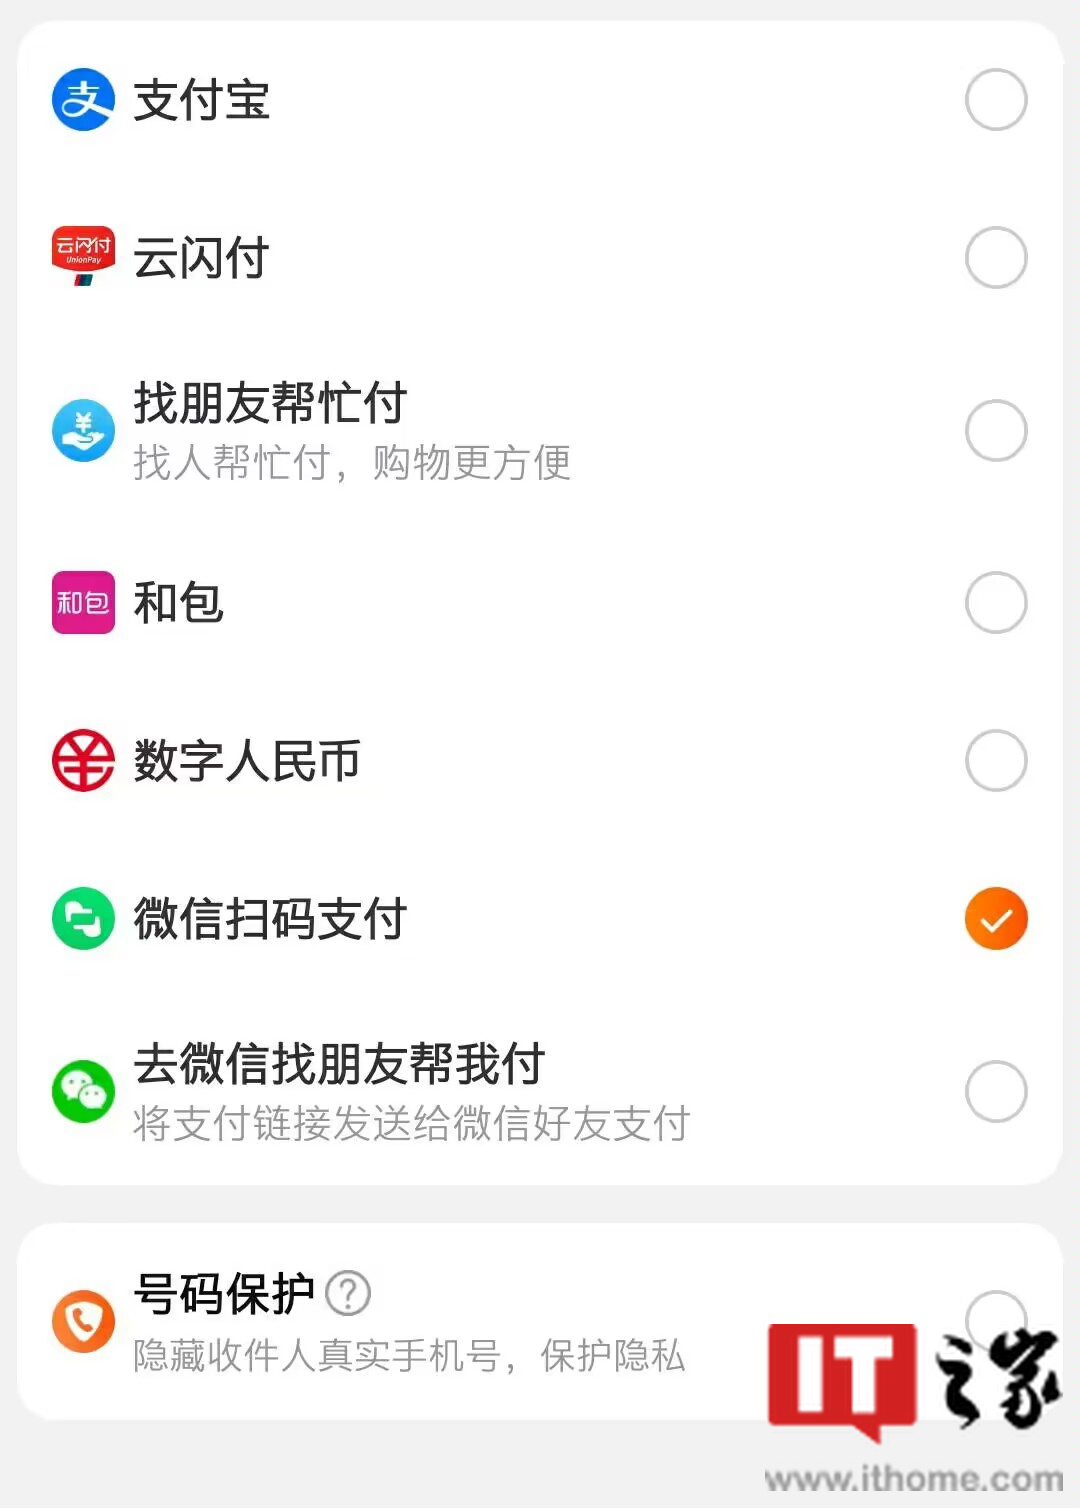 Taobao responded to the launch of WeChat scan code payment: it is gradually opening up, and it is currently only open to some users and some products.